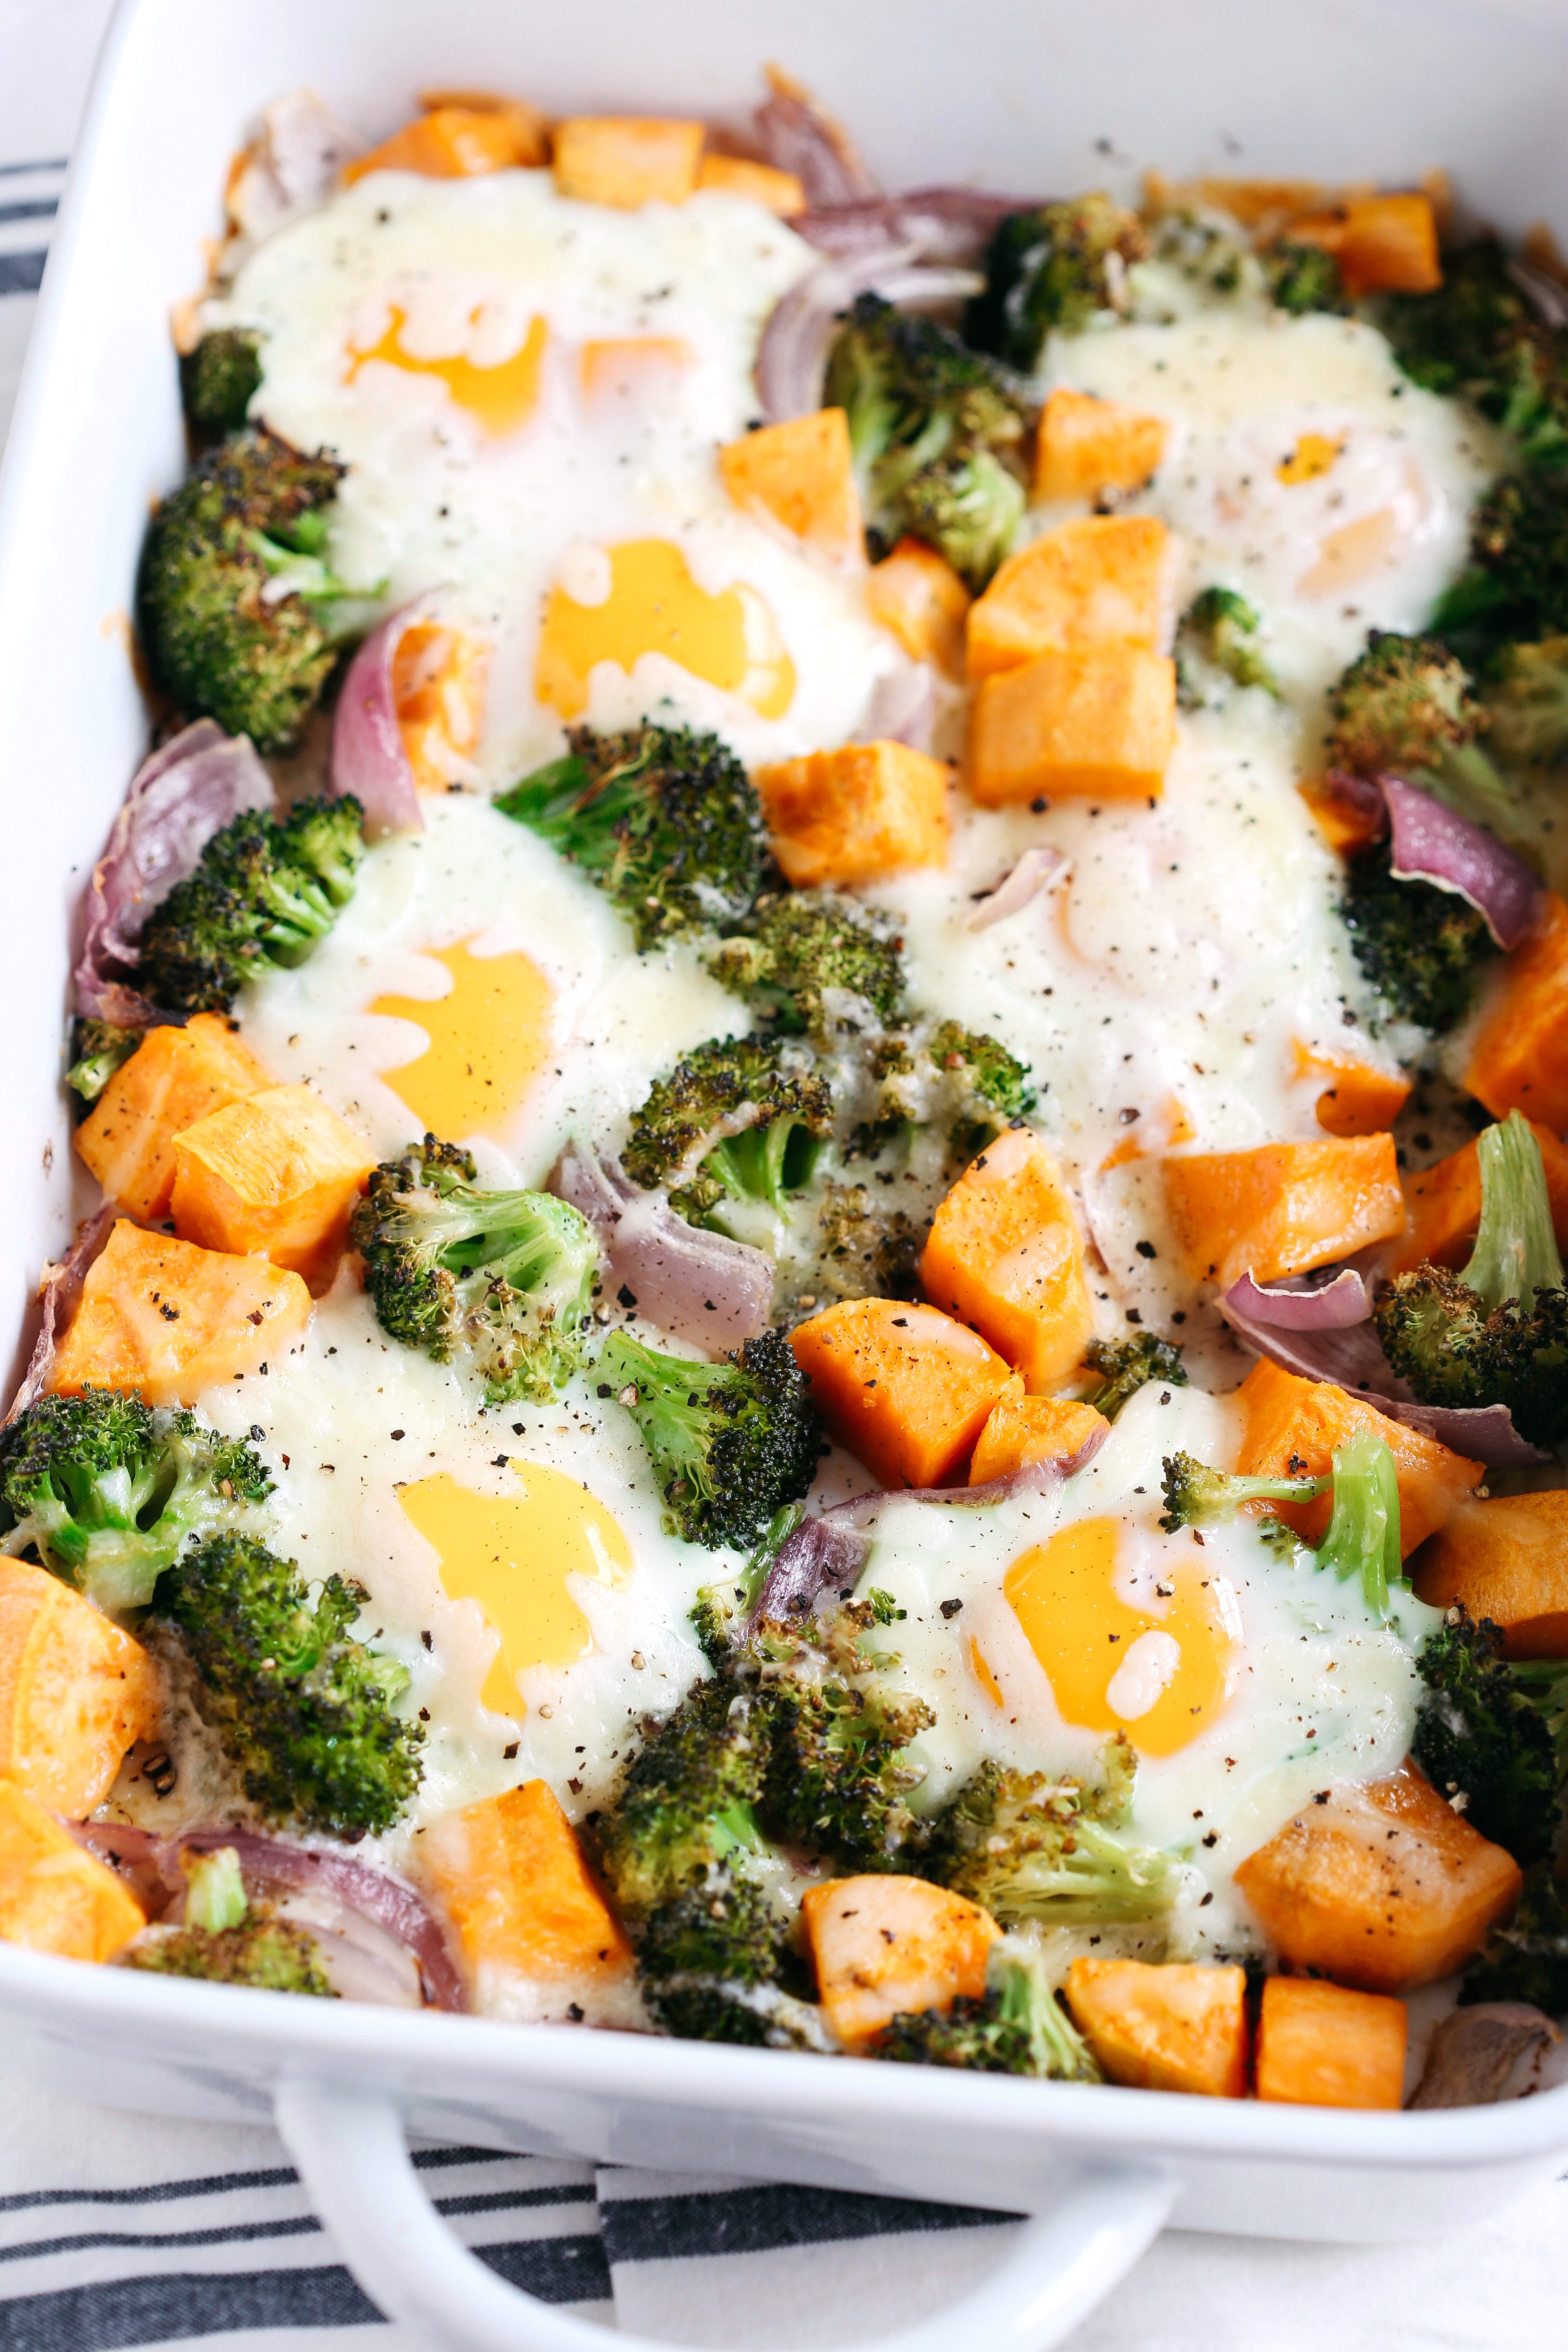 This Baked Egg and Roasted Veggie Casserole is the perfect healthy breakfast that uses up all those leftover veggies in one single dish!